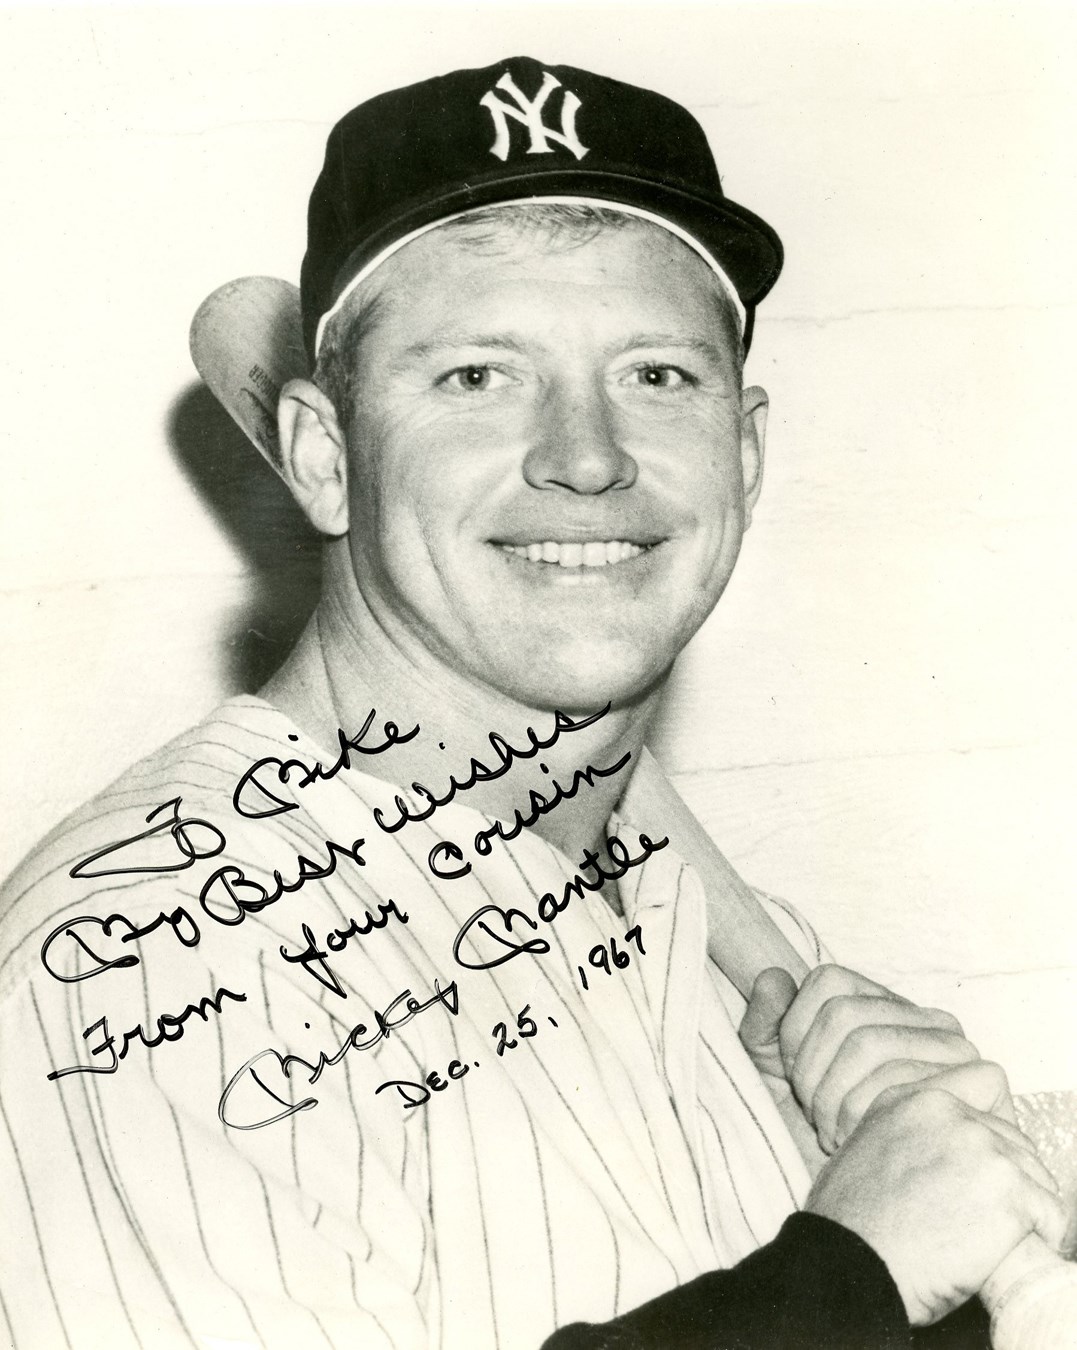 Mantle and Maris - Mickey Mantle Signed "Christmas" Photo Inscribed to His Cousin - Gifted on Christmas Day (PSA/DNA)